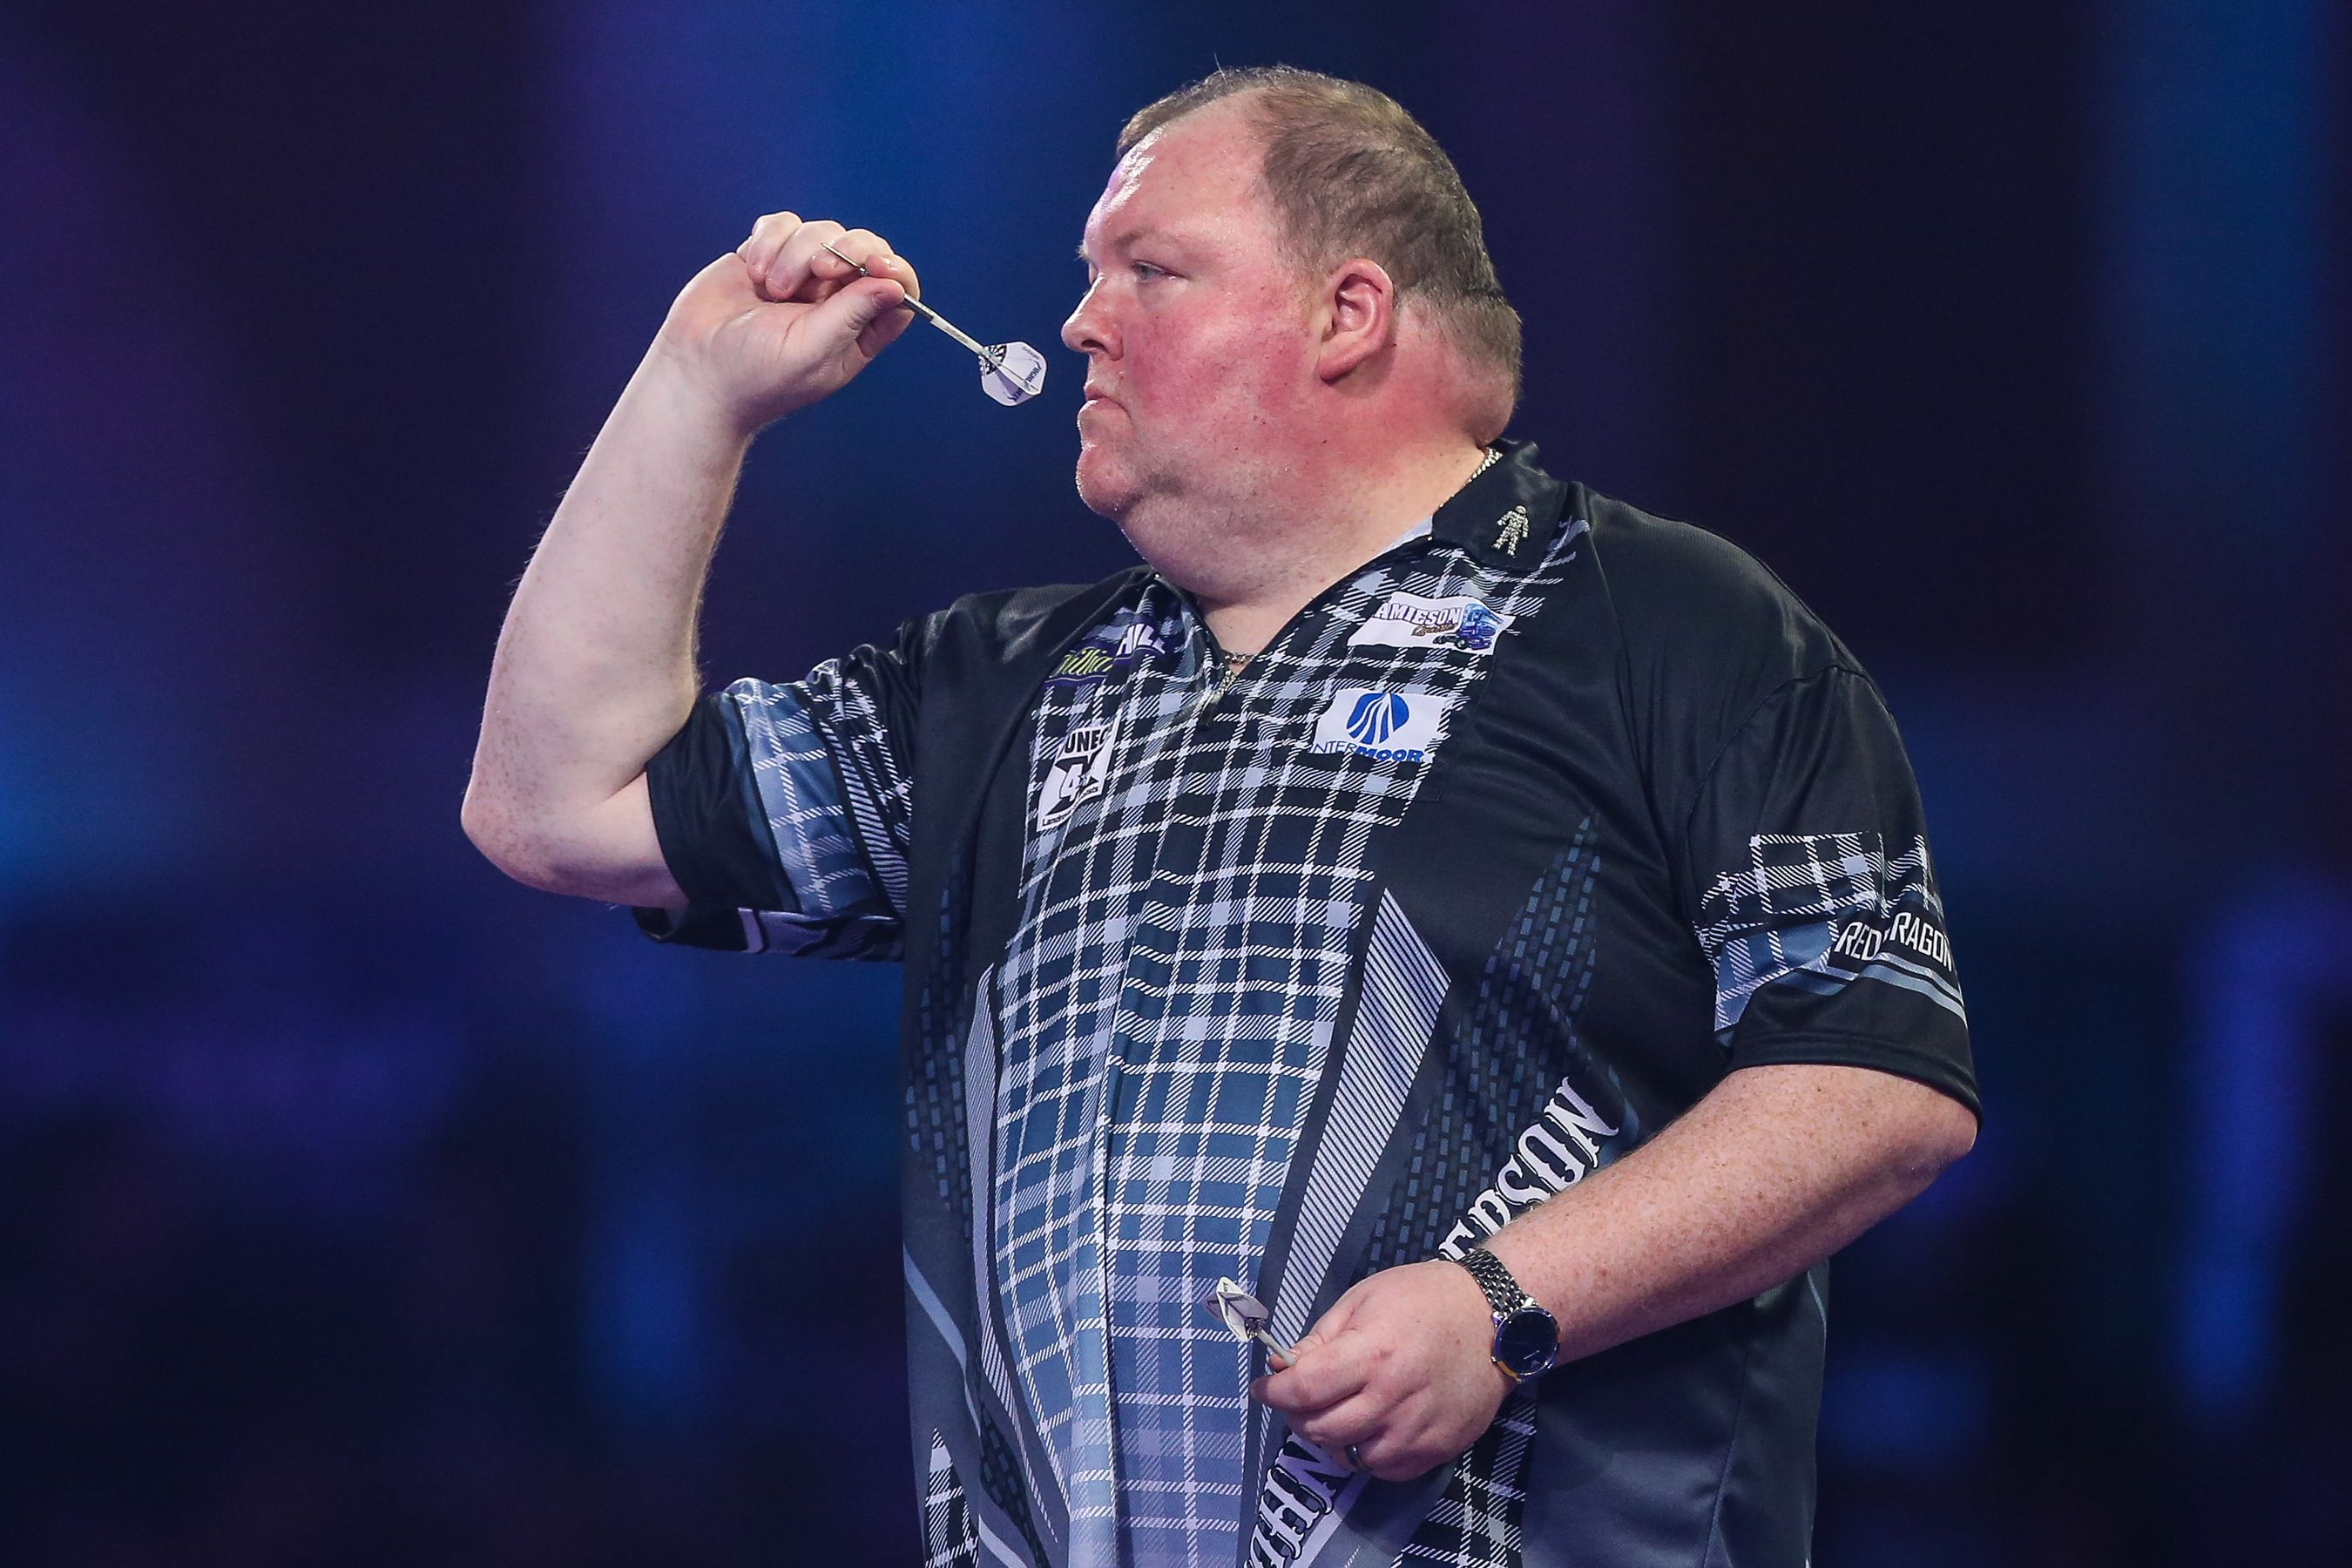 John Henderson during the PDC William Hill World Darts Championship. Picture: Shutterstock.